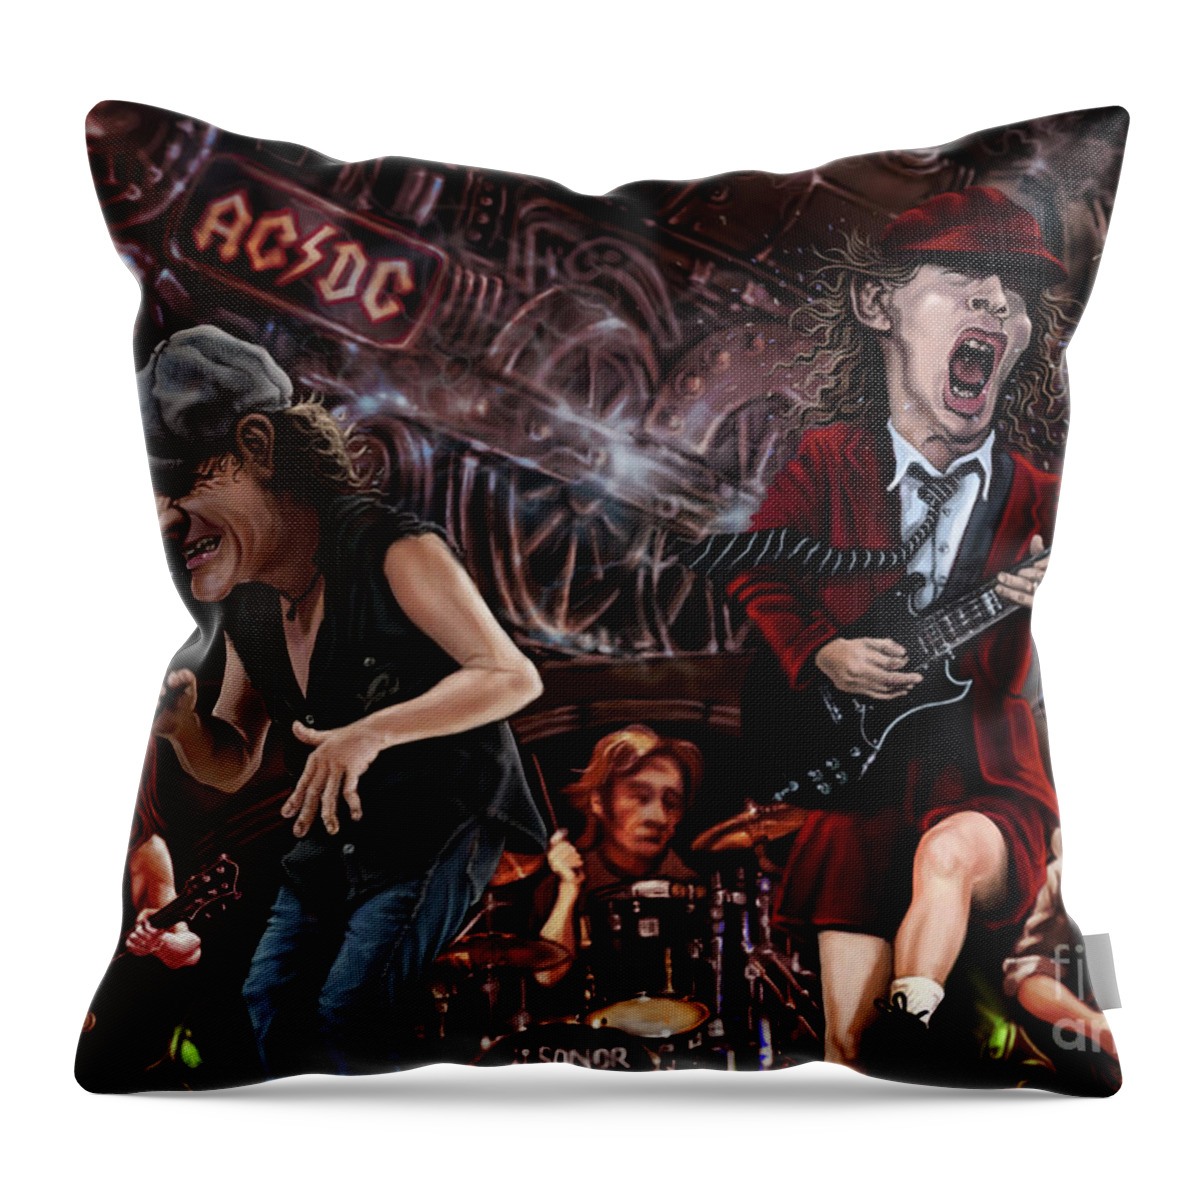 Ac/dc Throw Pillow featuring the digital art Ac/dc by Andre Koekemoer